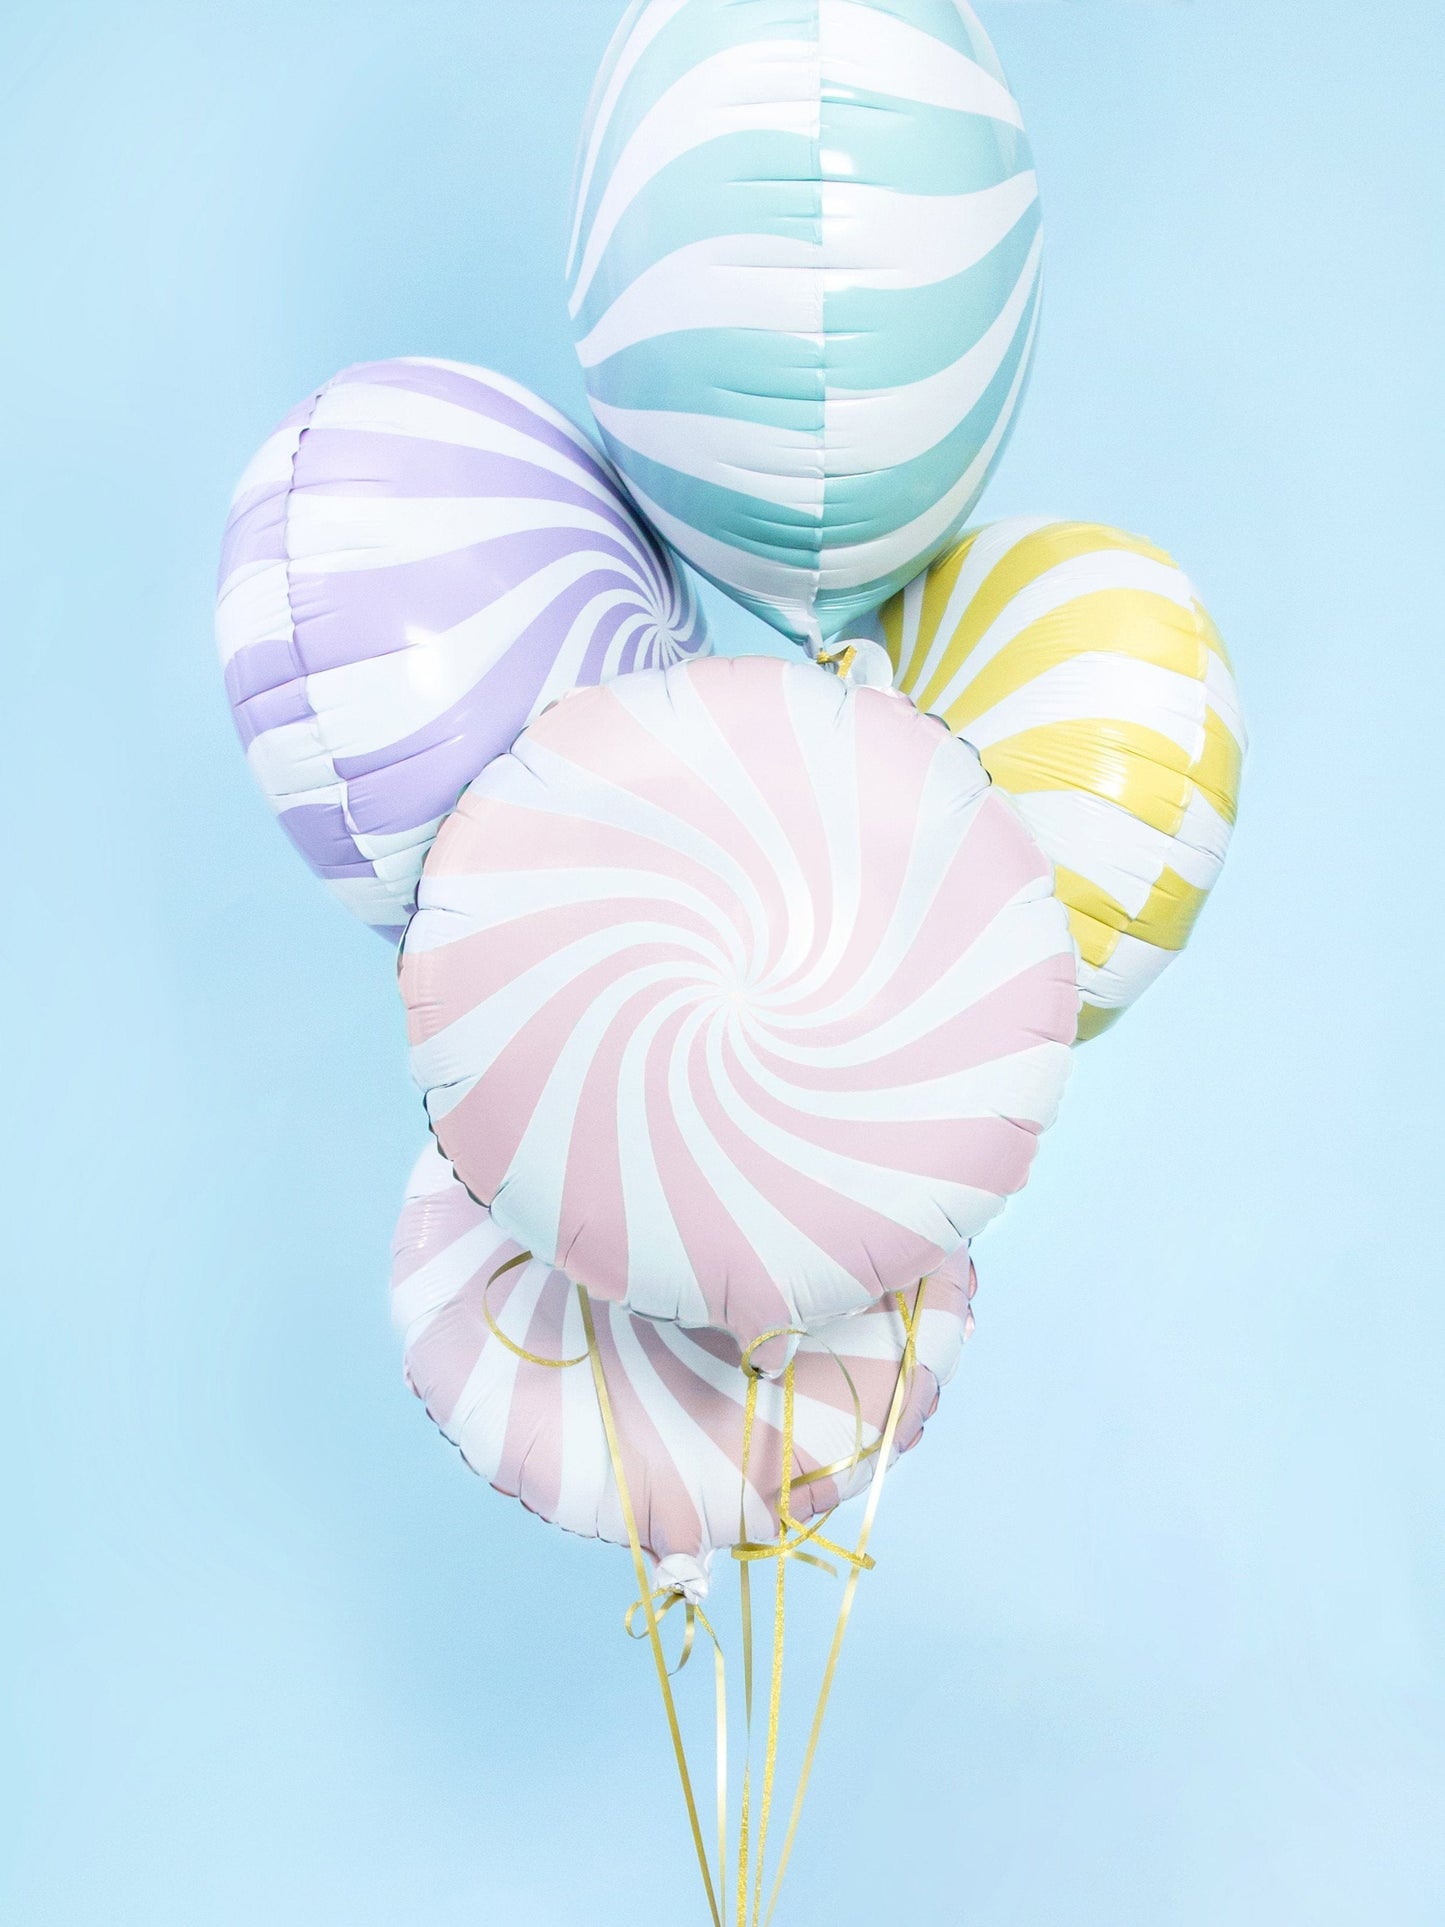 Candy Swirl Balloon | Lollipop Candy Balloon Yellow | Online Balloons Party Deco